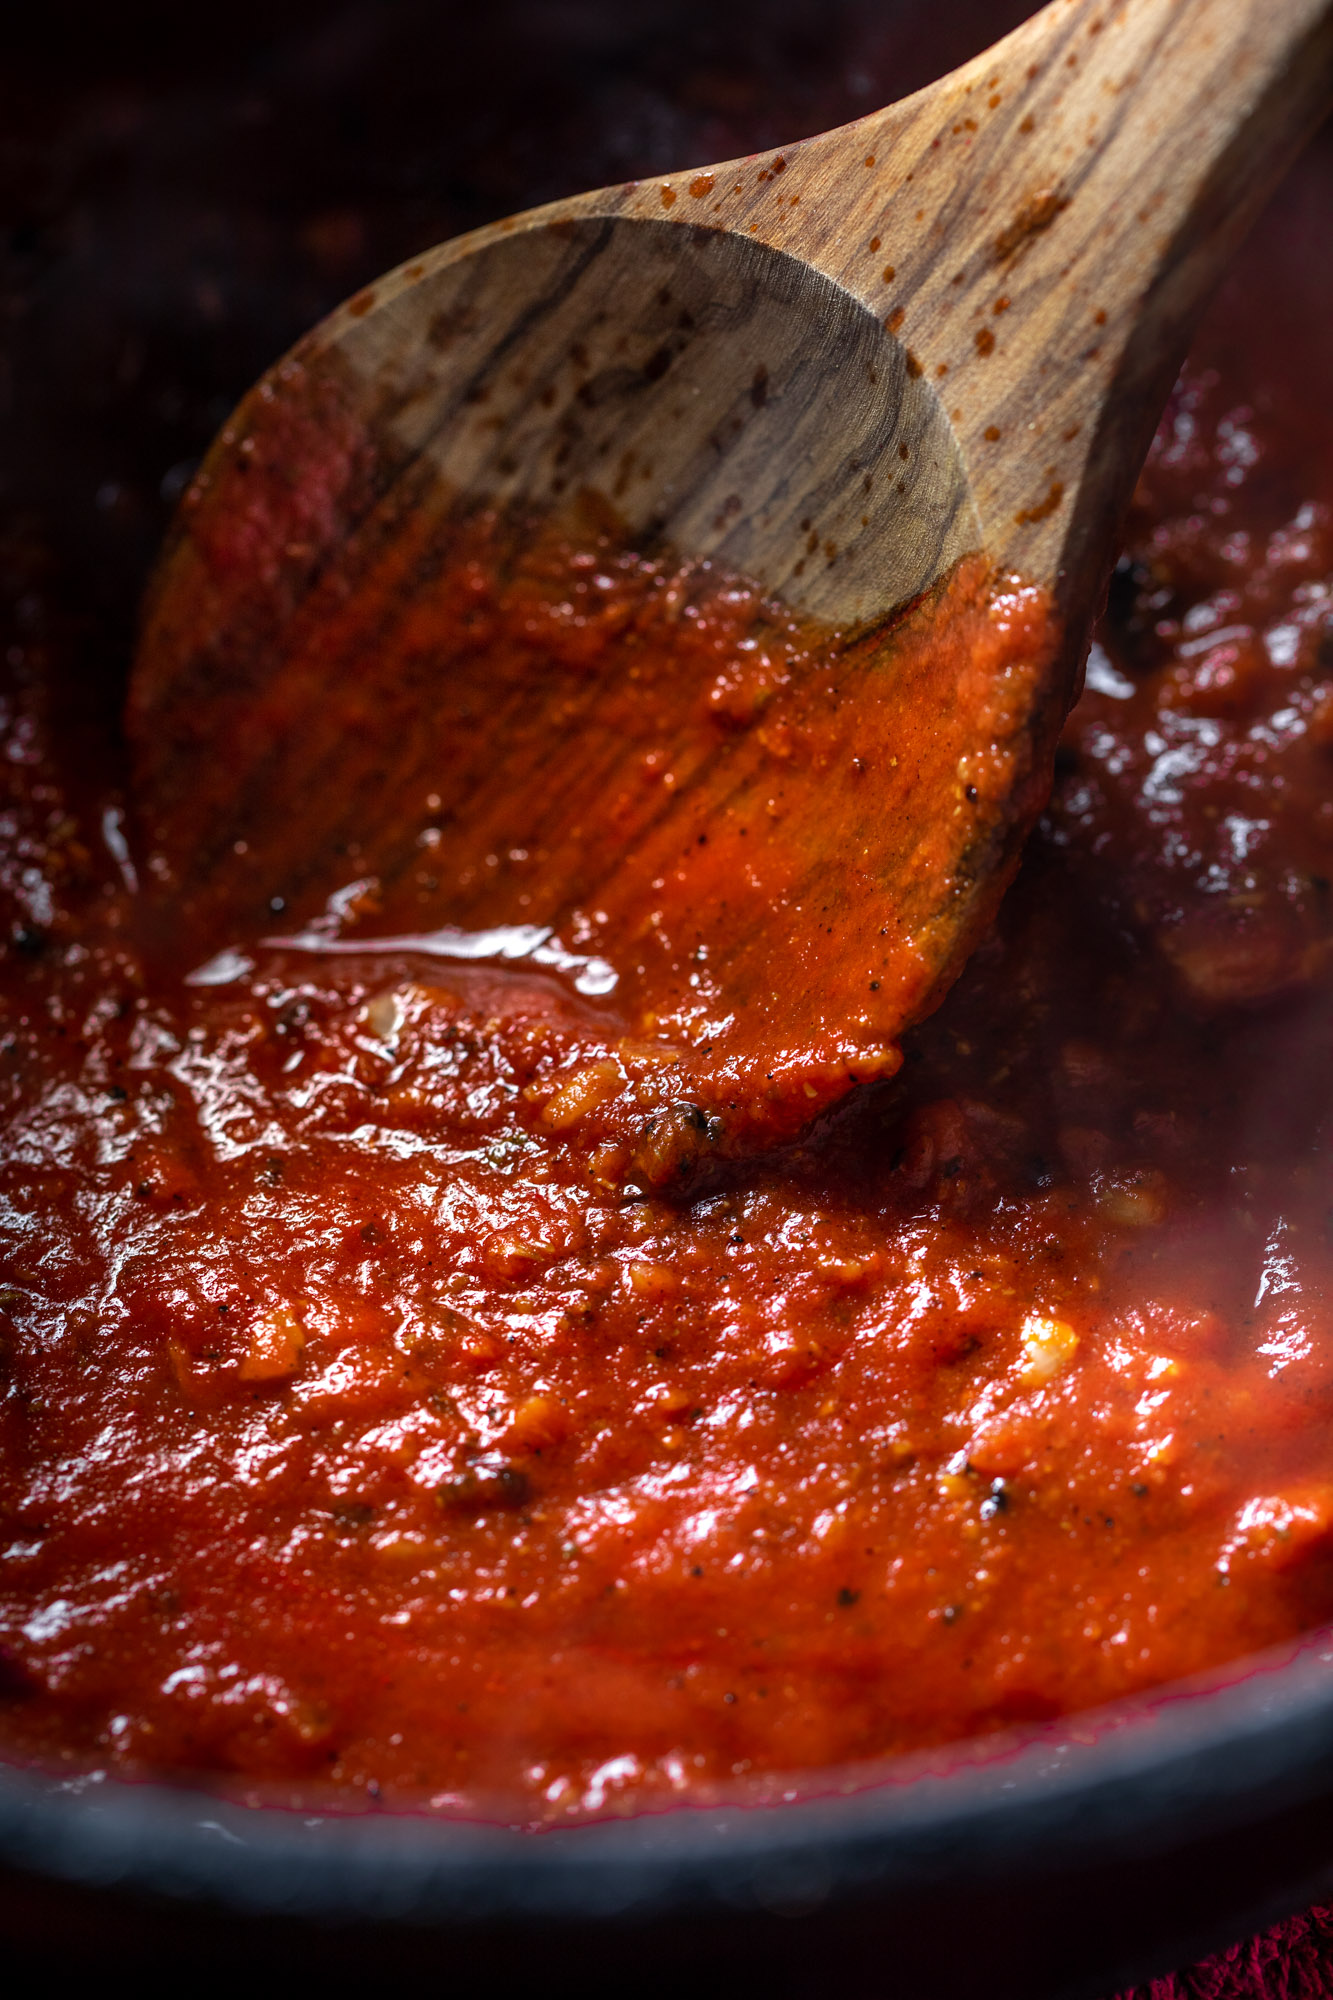 Let your sauce simmer for at least 10mins before removing from heat